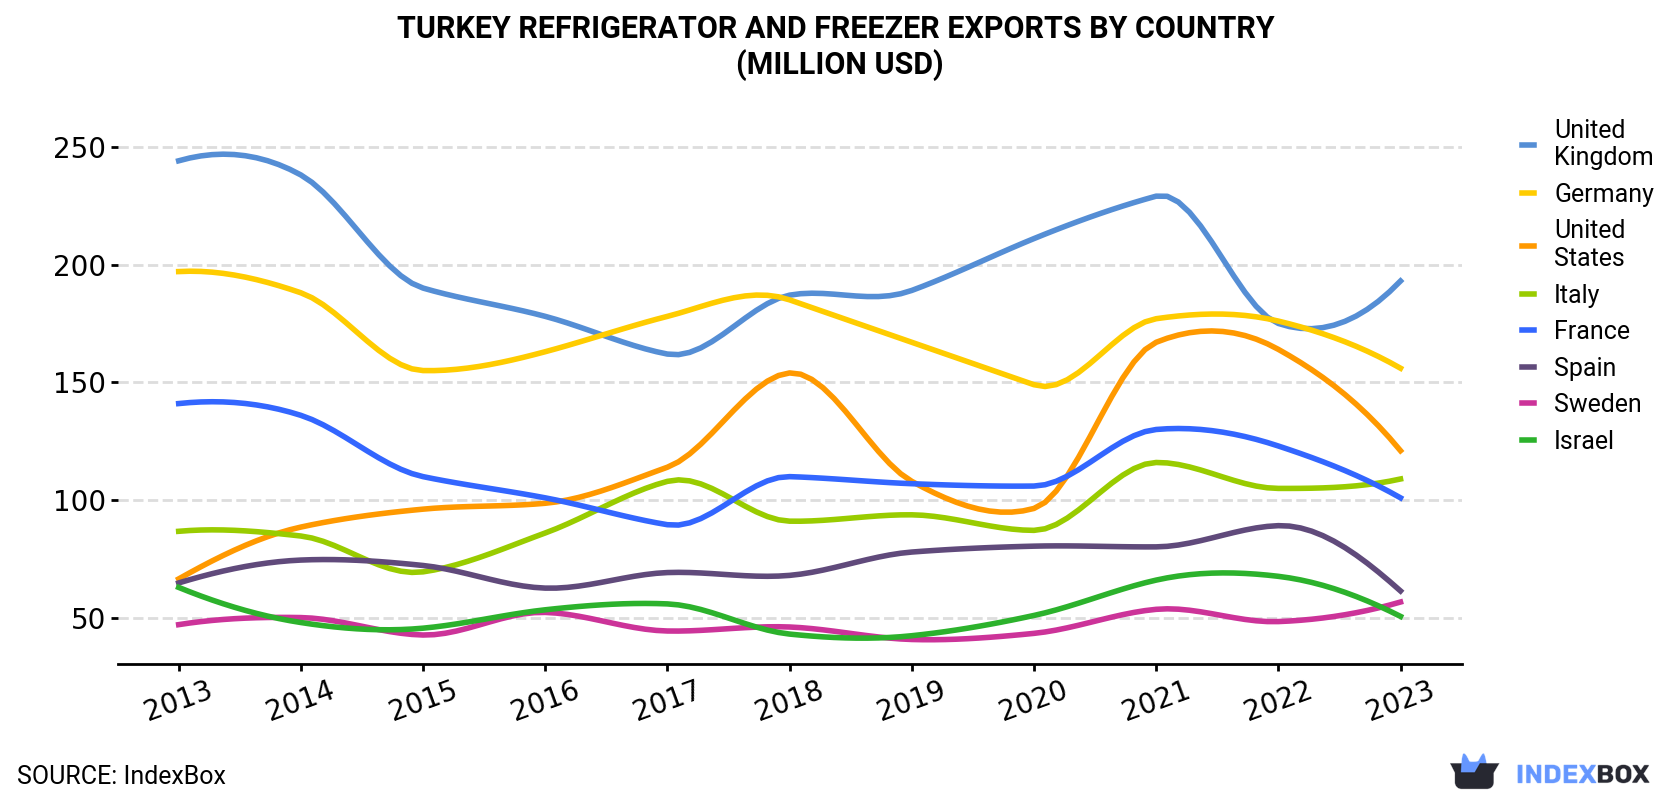 Turkey Refrigerator and Freezer Exports By Country (Million USD)